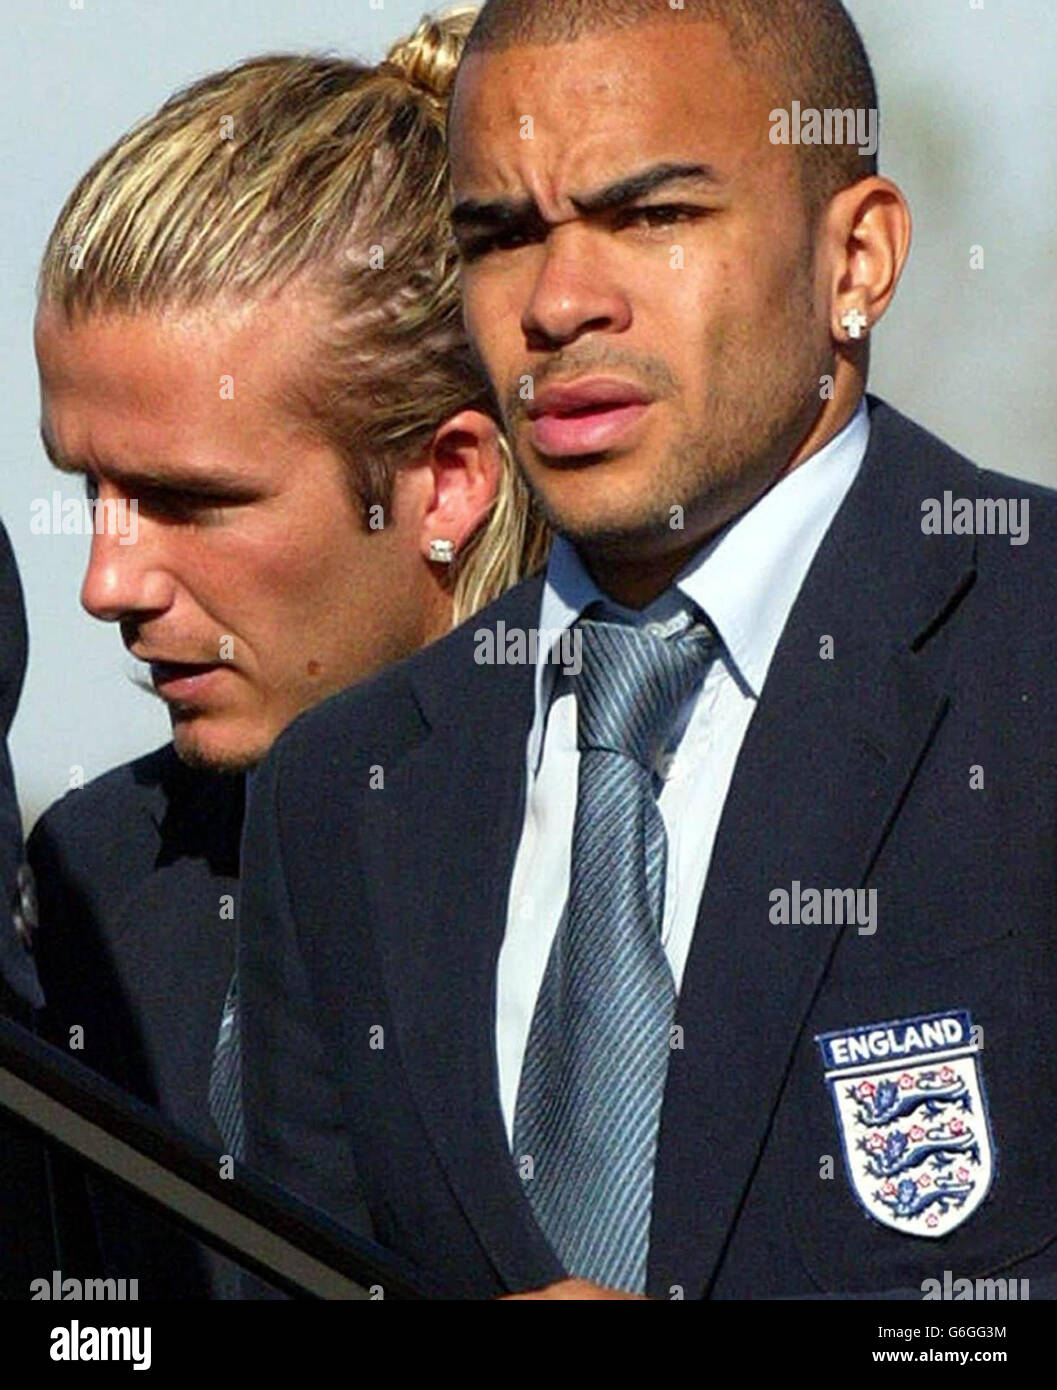 England captain David Beckham (left) and midfielder Kieron Dyer board the team's plane at Luton Airport, as the squad left for Istanbul for this weekend's crucial Euro 2004 qualifying match against Turkey. England must avoid defeat on Saturday to guarantee a place in next year's tournament, but their preparations have been upset by Rio Ferdinand's controversial exclusion from the squad and Michael Owen's withdrawal through injury. Stock Photo